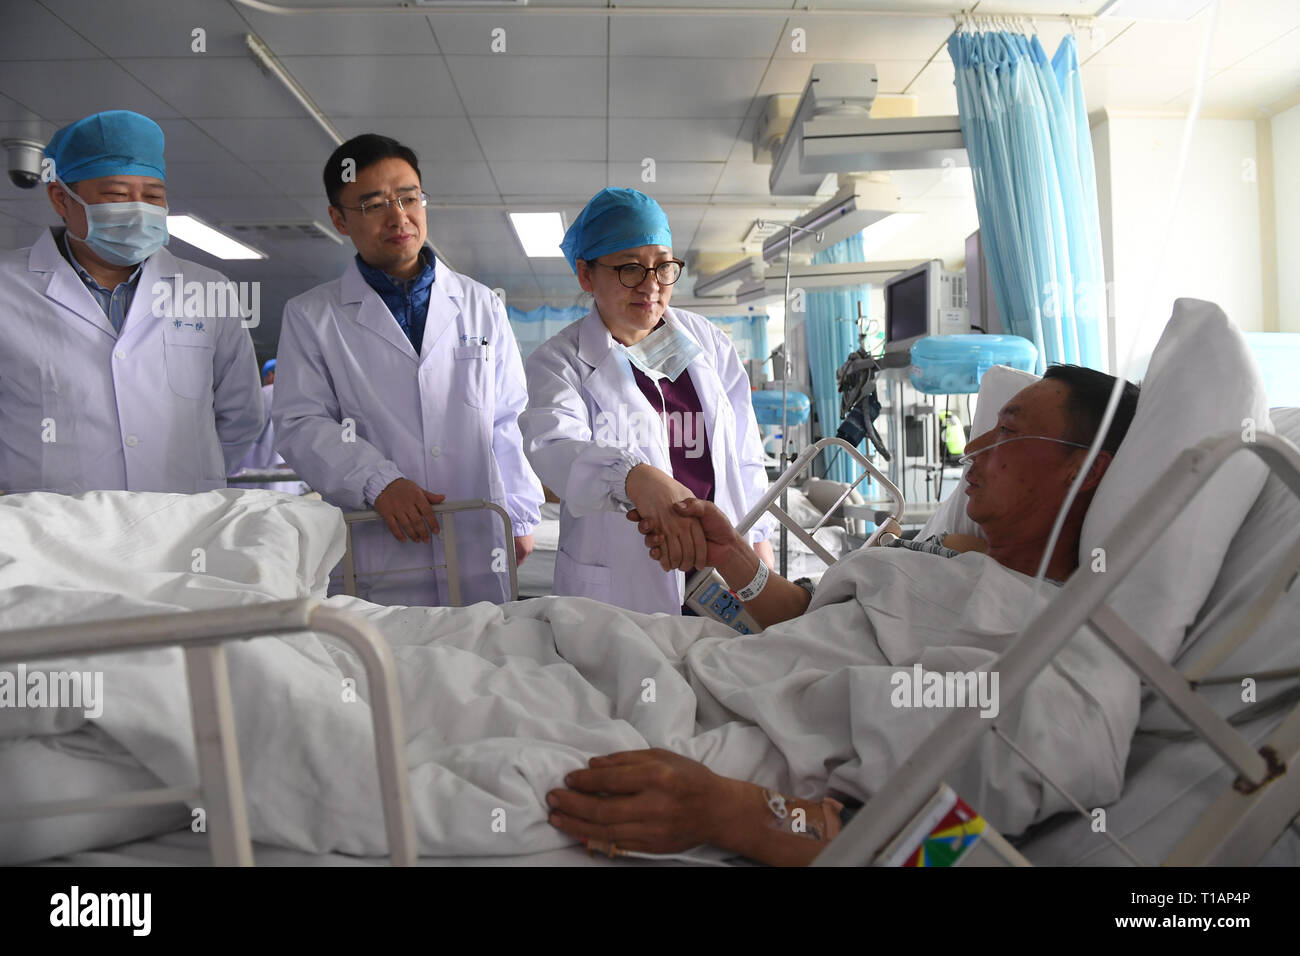 Beijing March 25 19 Xinhua Sun Qingfang 2nd R Chief Physician Of Neurosurgery Of Ruijin Hospital Affiliated With Shanghai Jiaotong University School Of Medicine And Other Doctors Check An